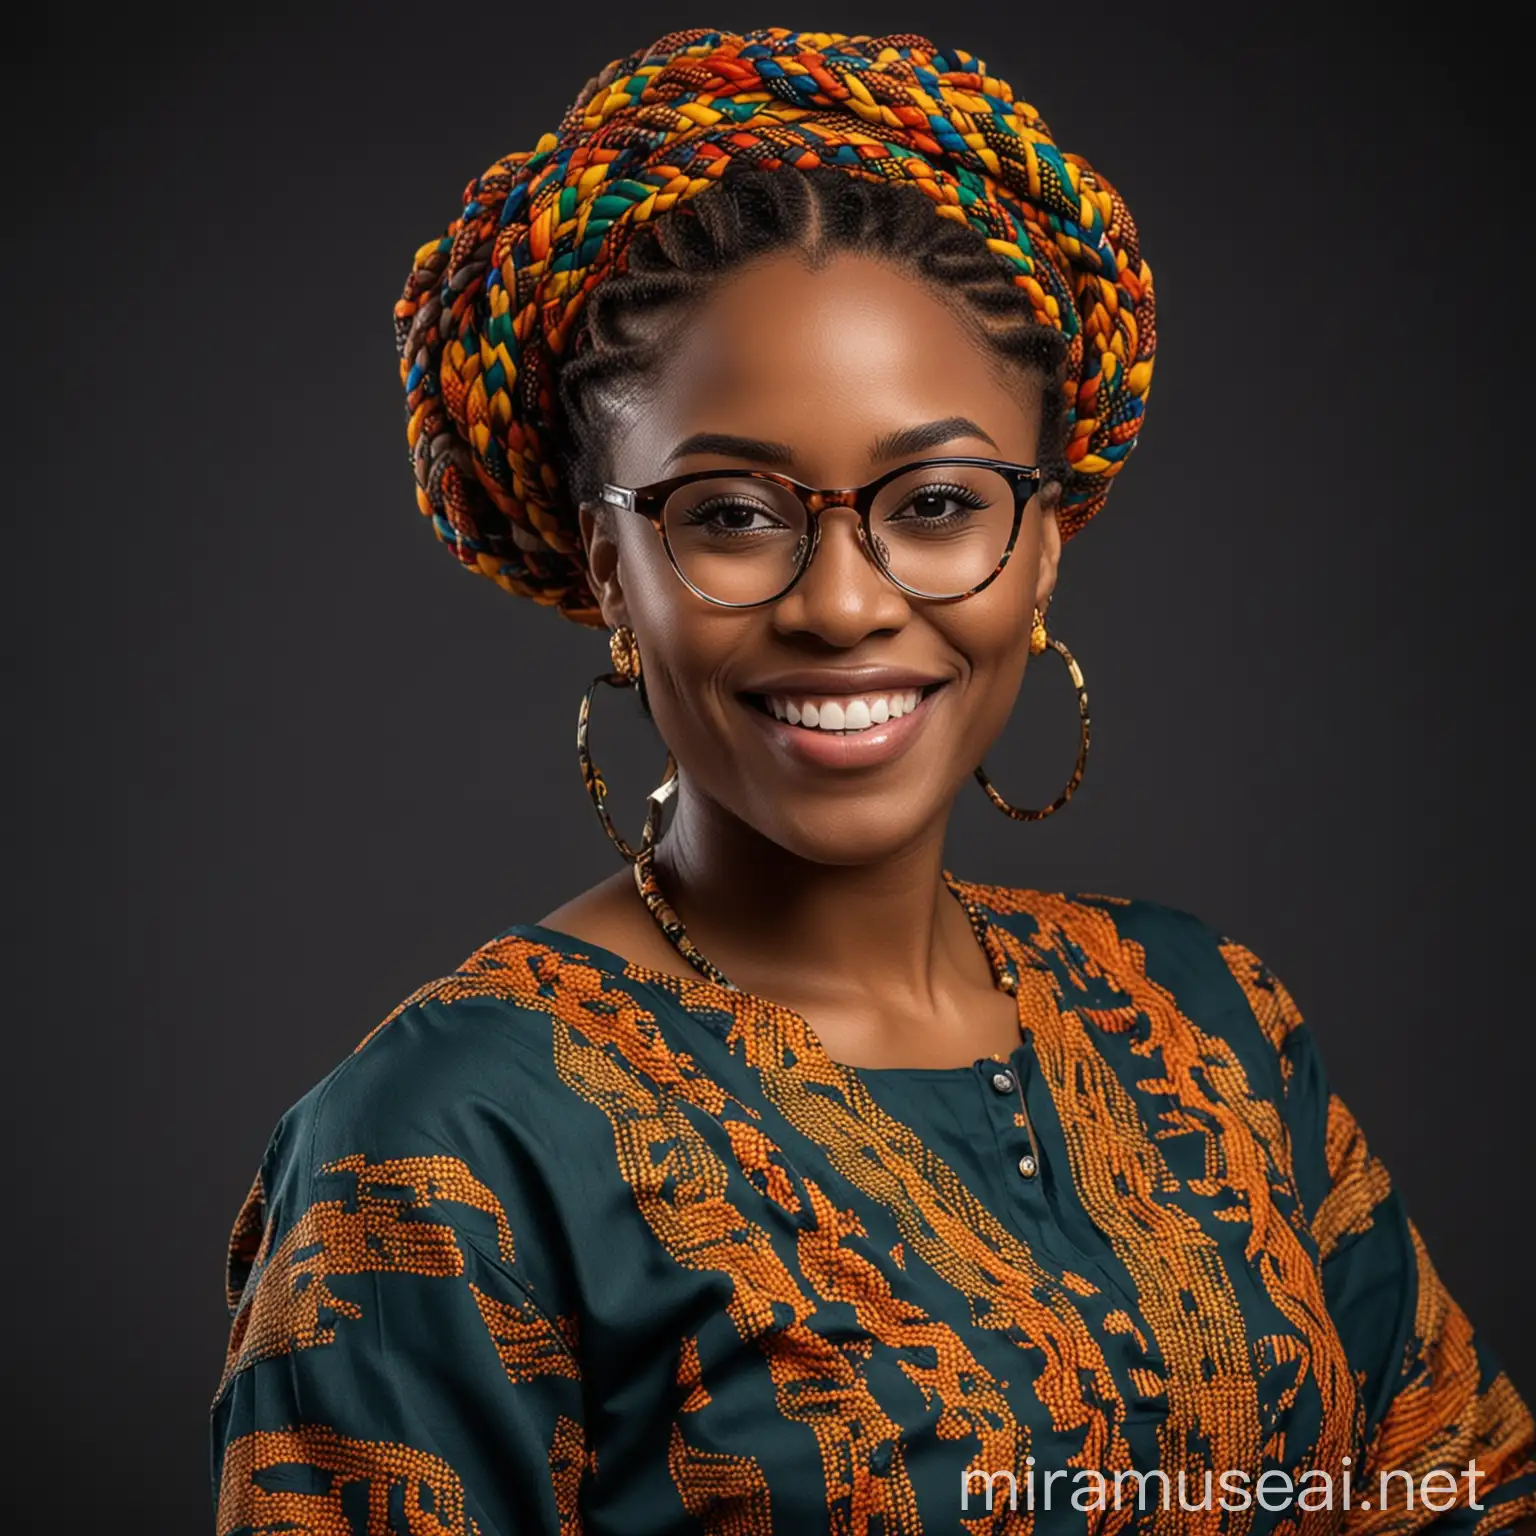 A Nigeria lady dressed in African attire, with braided hair and eye glasses, smiling beautifully, looking directly at the camera, posing sexually on a dark studio background